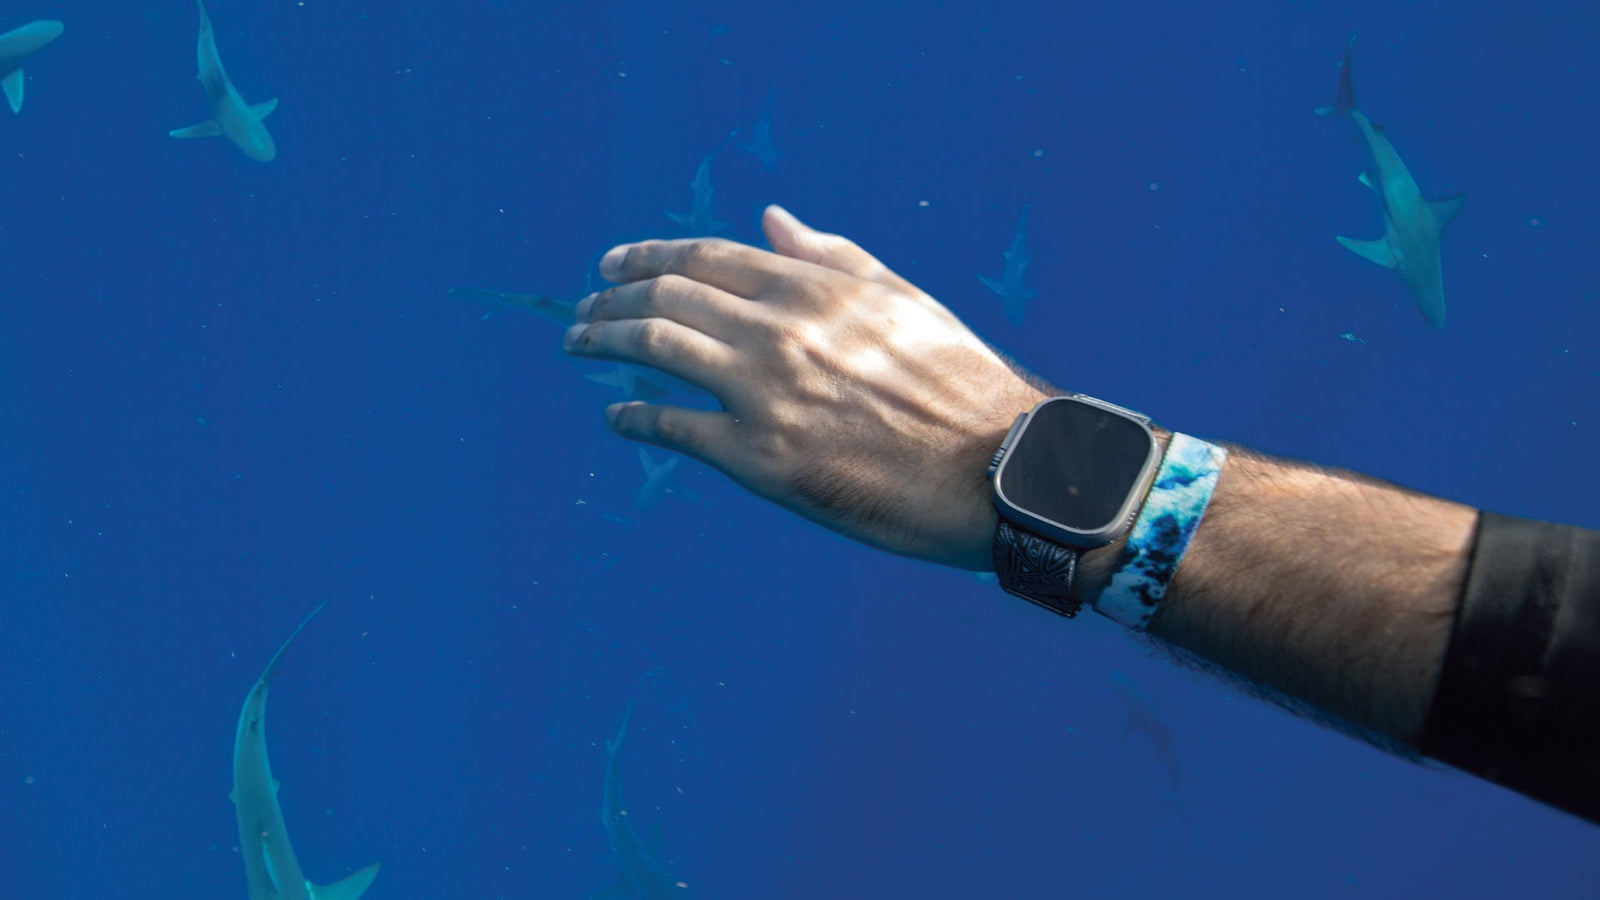 Apple Watch Band underwater with sharks. 